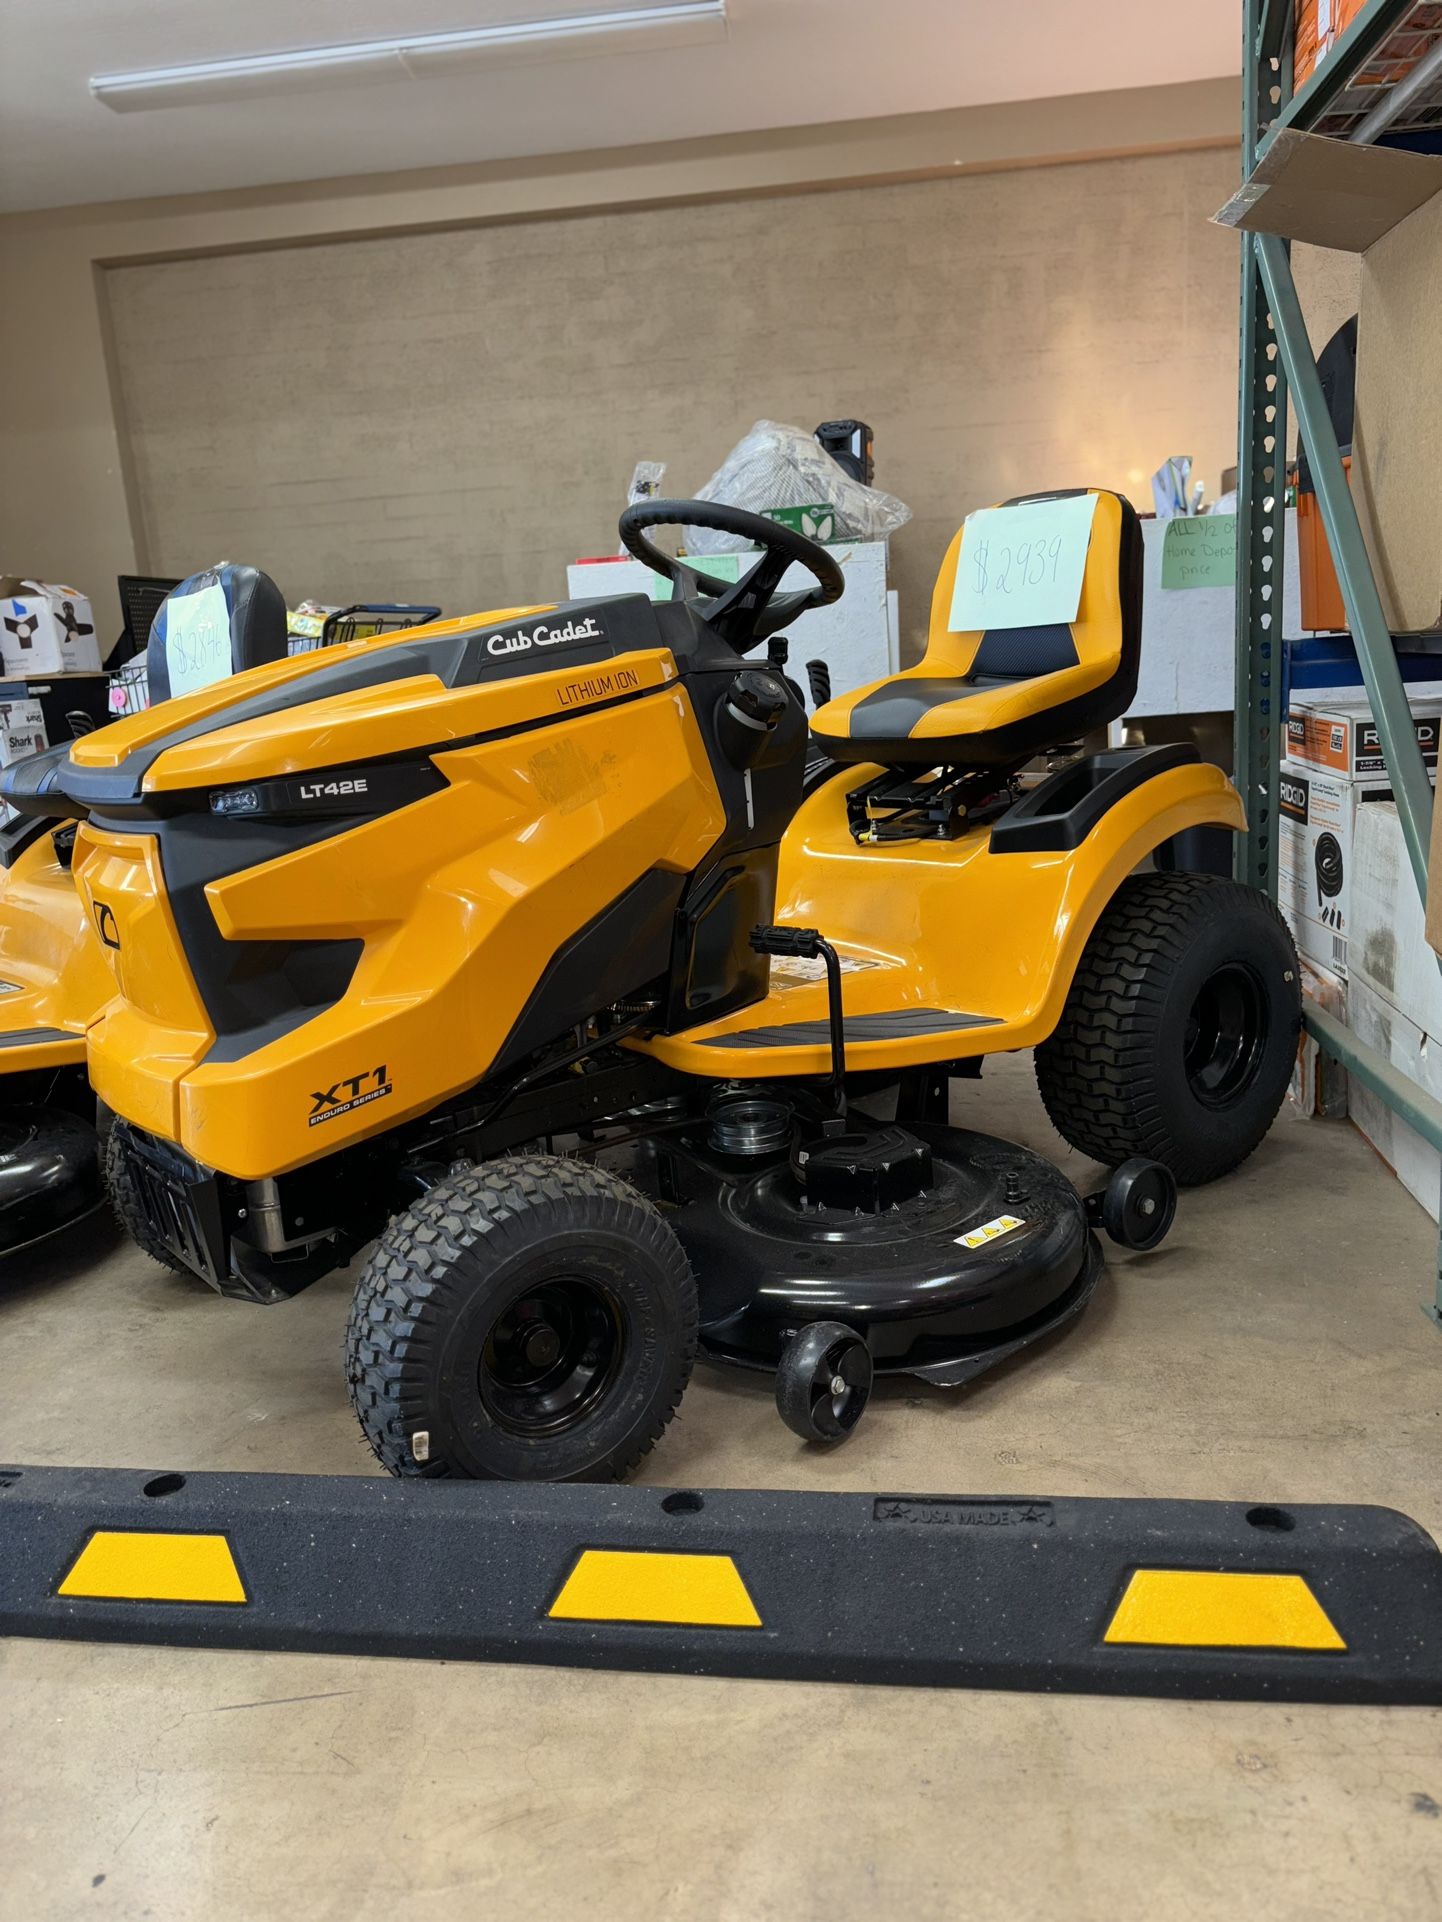 Used Good) Cub Cadet XT1 Enduro Series LT 46 in. 547cc Fuel Injected Hydro Gas Lawn Tractor with Push Button Start